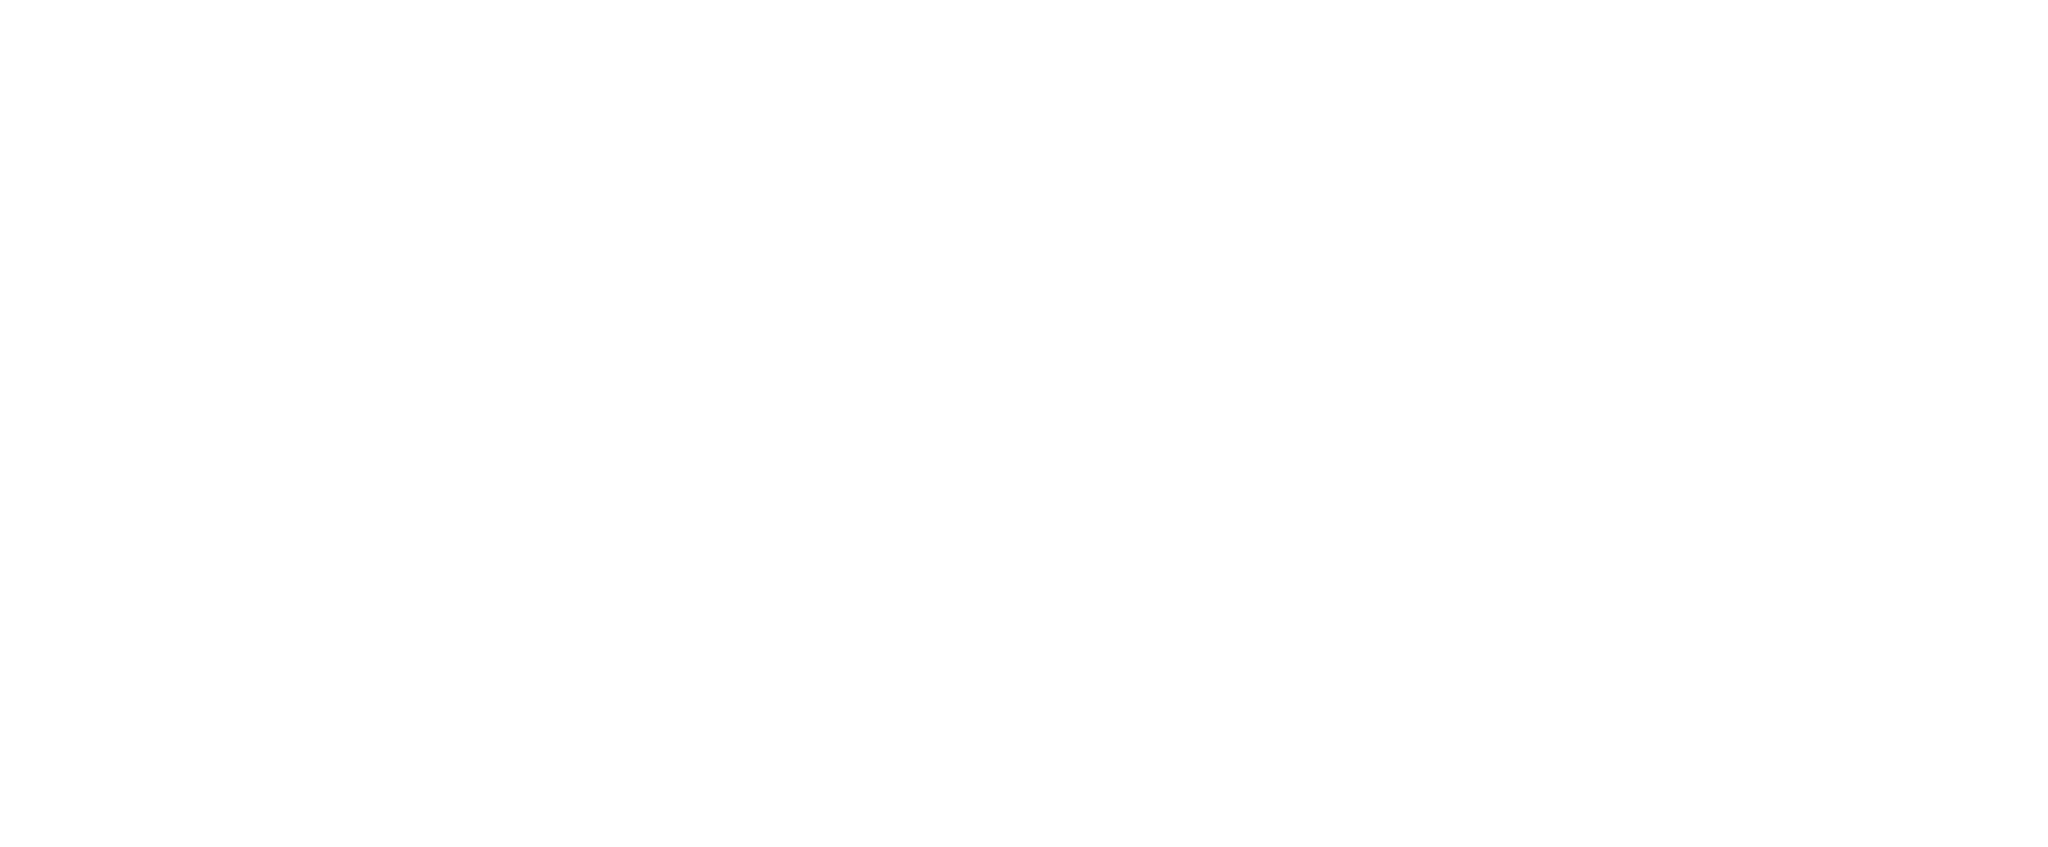 Apex Roofing Quad Cities Top Roofers